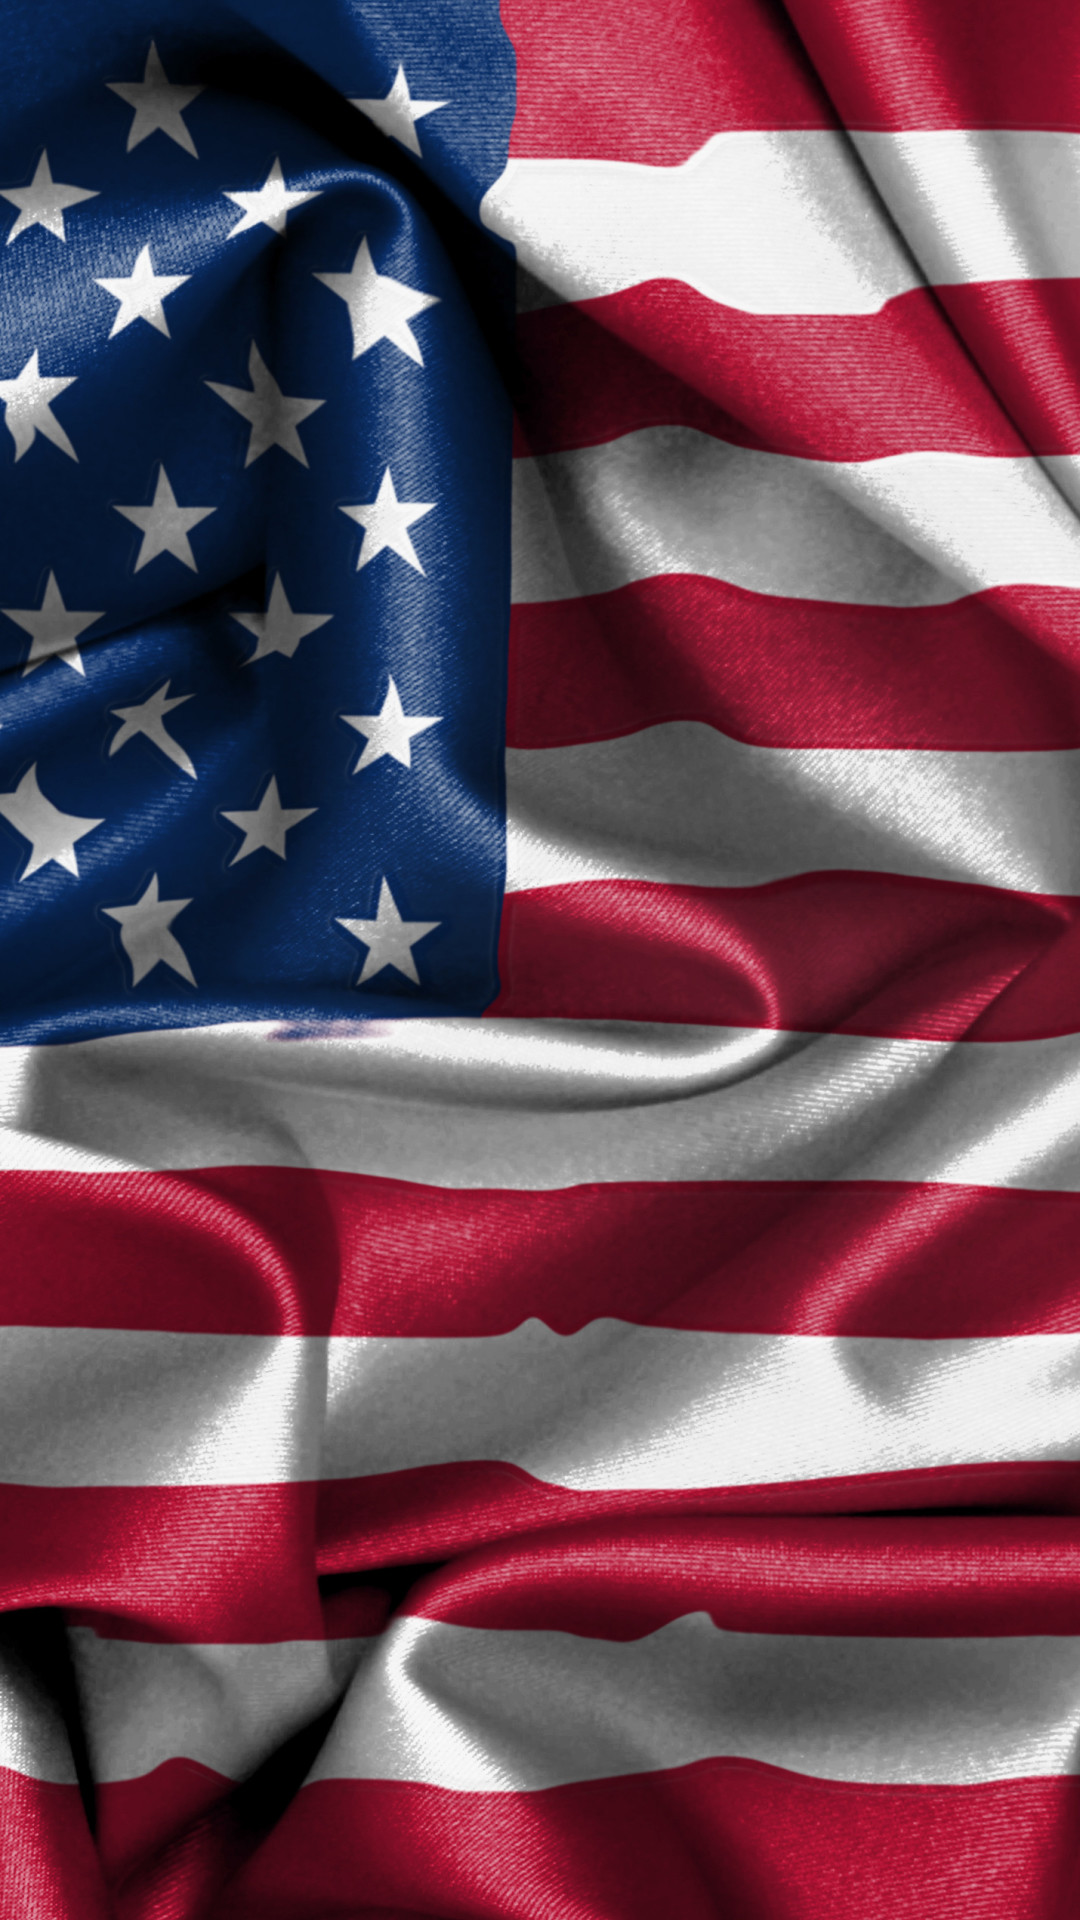 Wallpaper American Flag Images Wallpapers